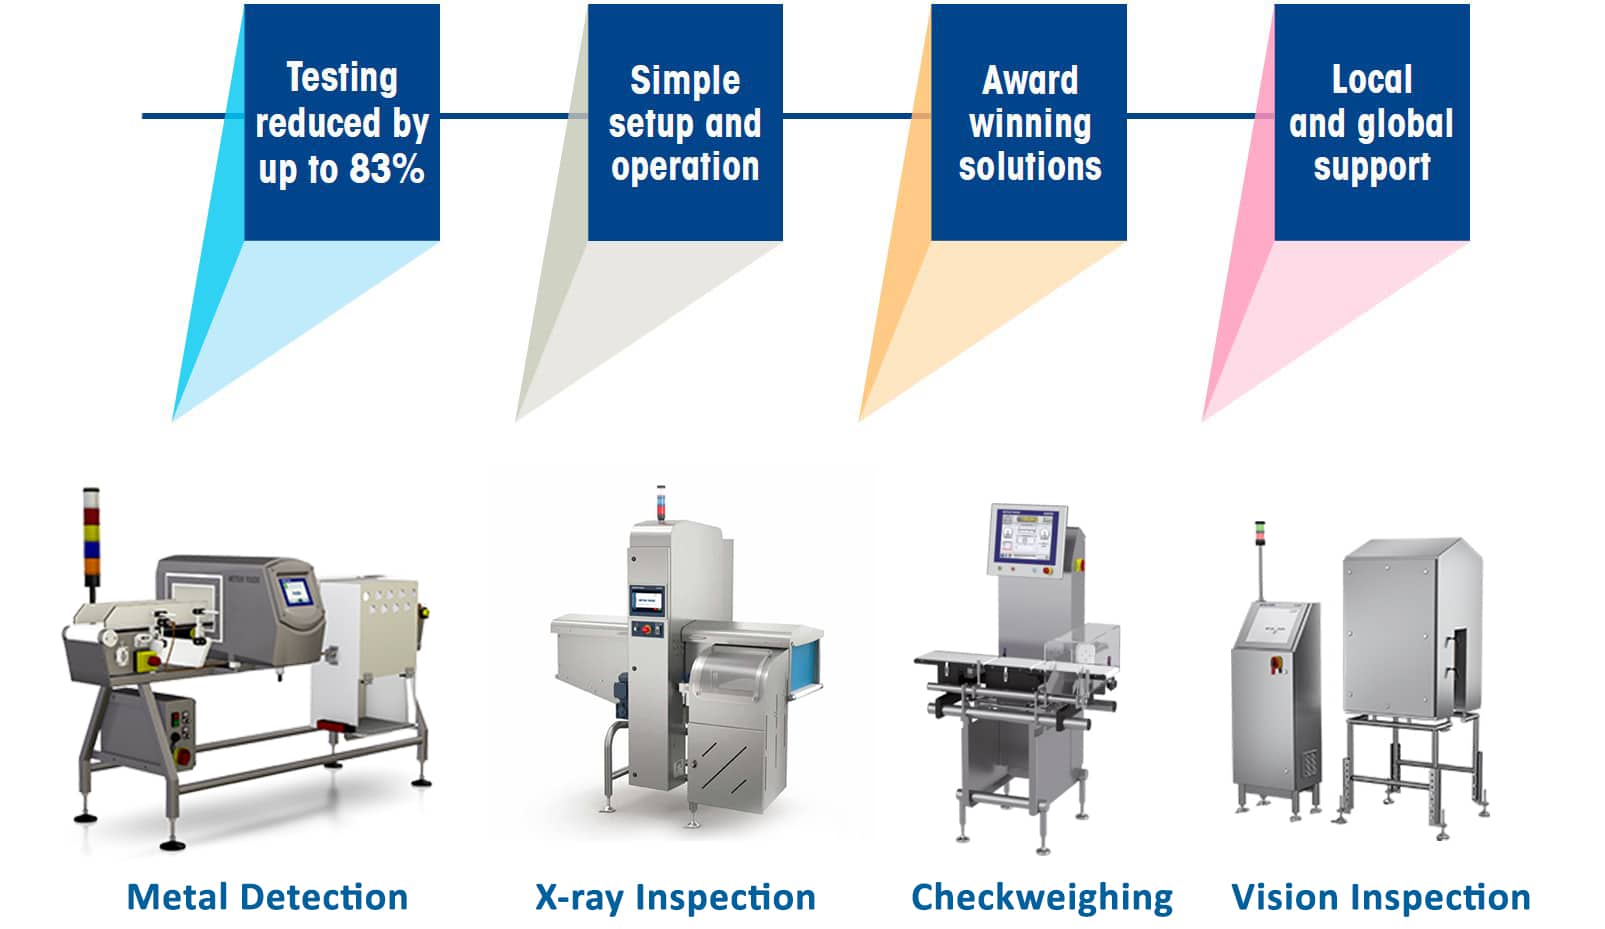 Product inspection, Mettler Toledo, X-ray inspection, Checkweigher, Metal Detector